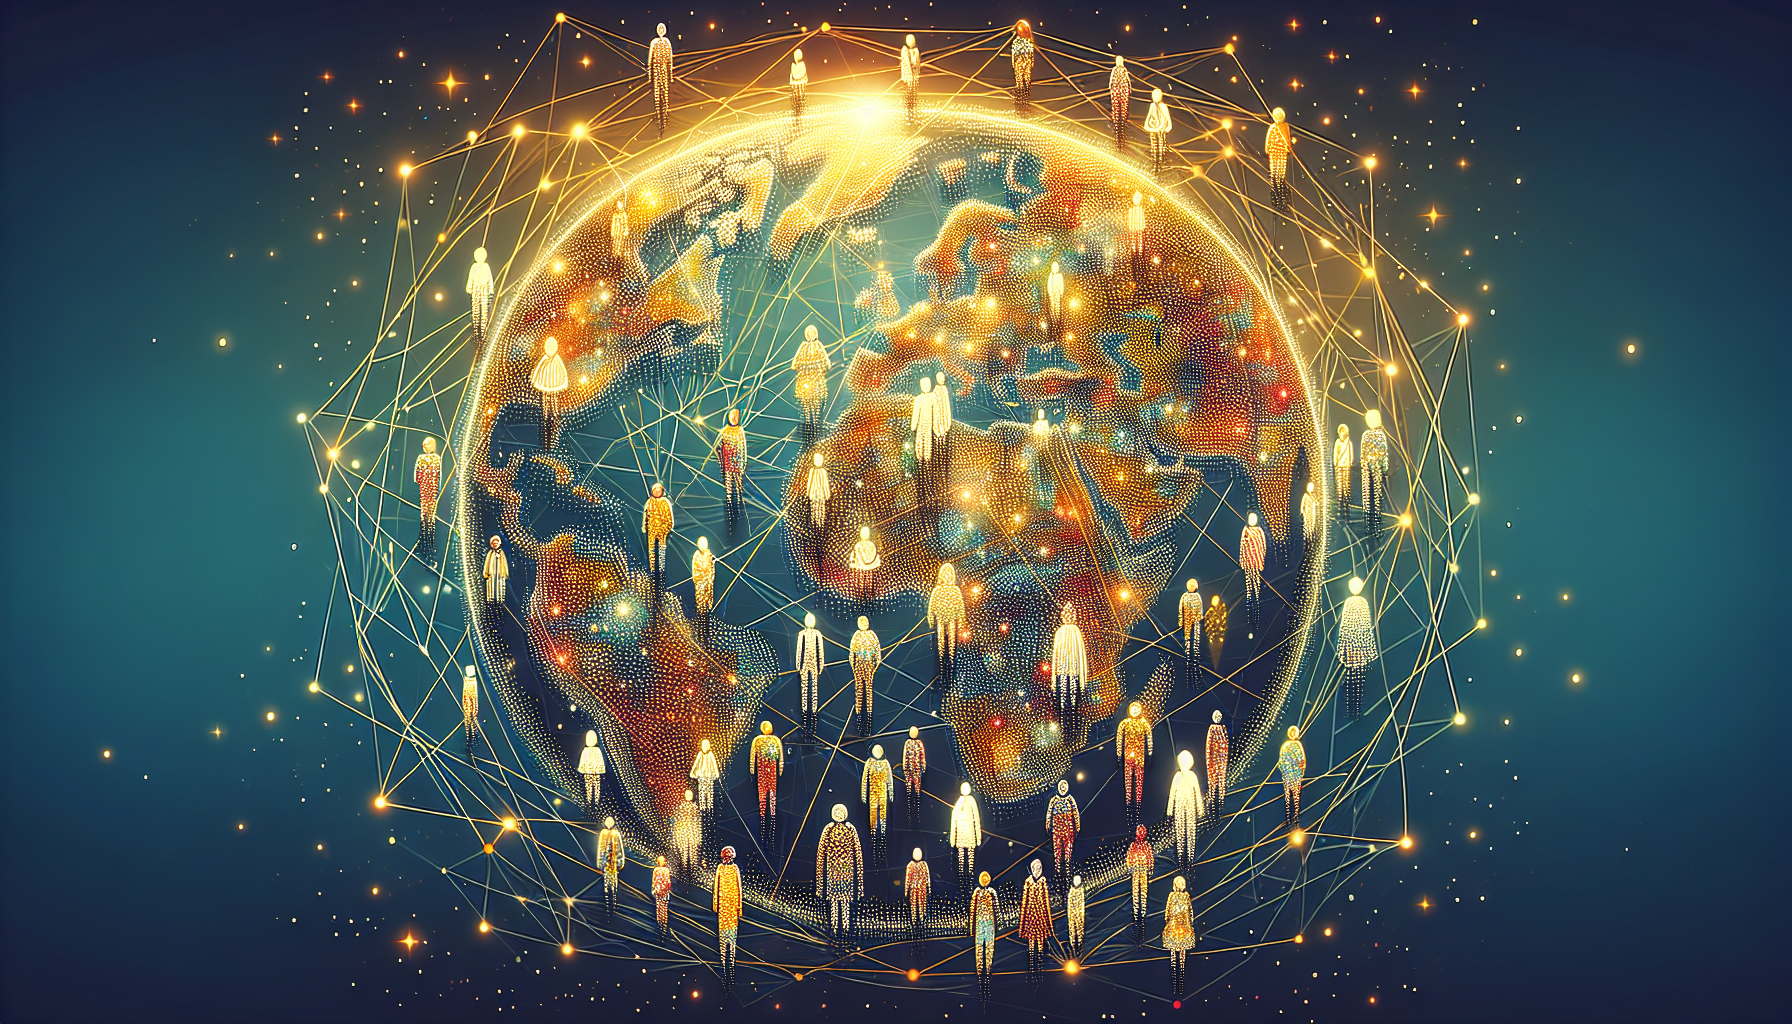 Illustration of a global network with diverse individuals